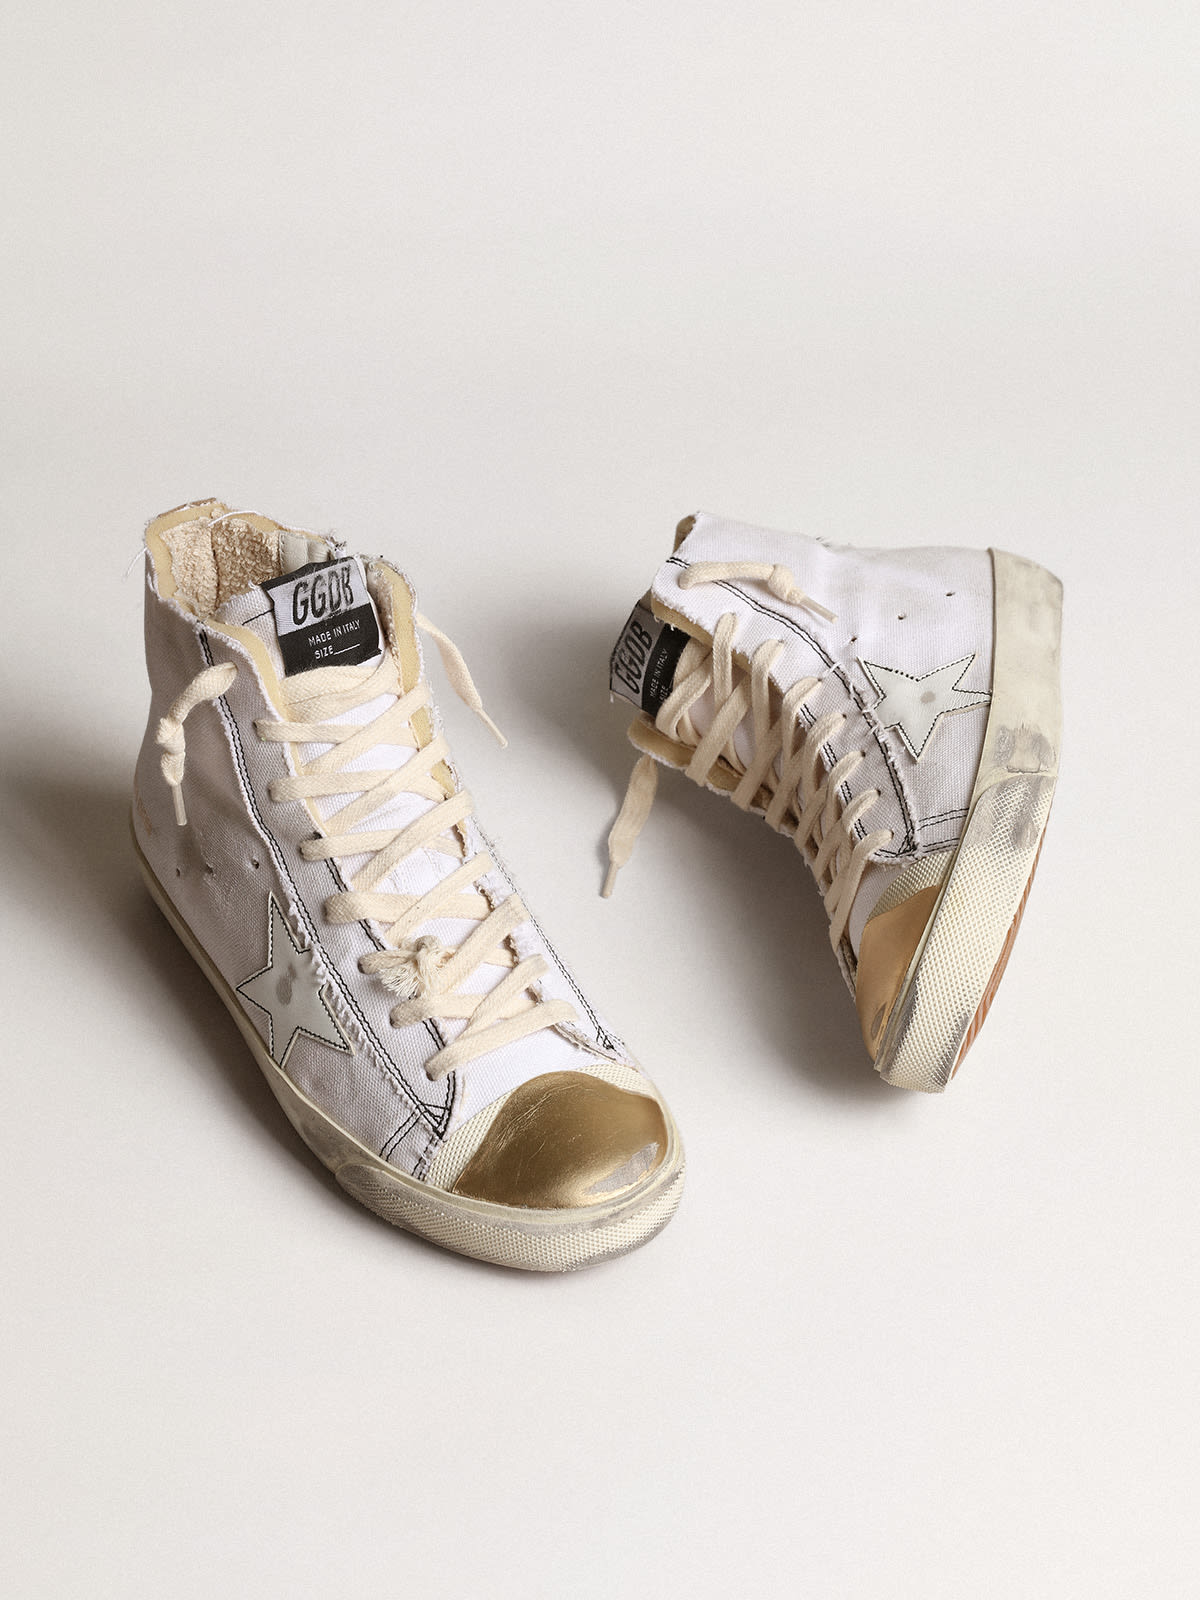 Golden Goose - Francy LAB sneakers with white leather star and gold metallic leather toe in 